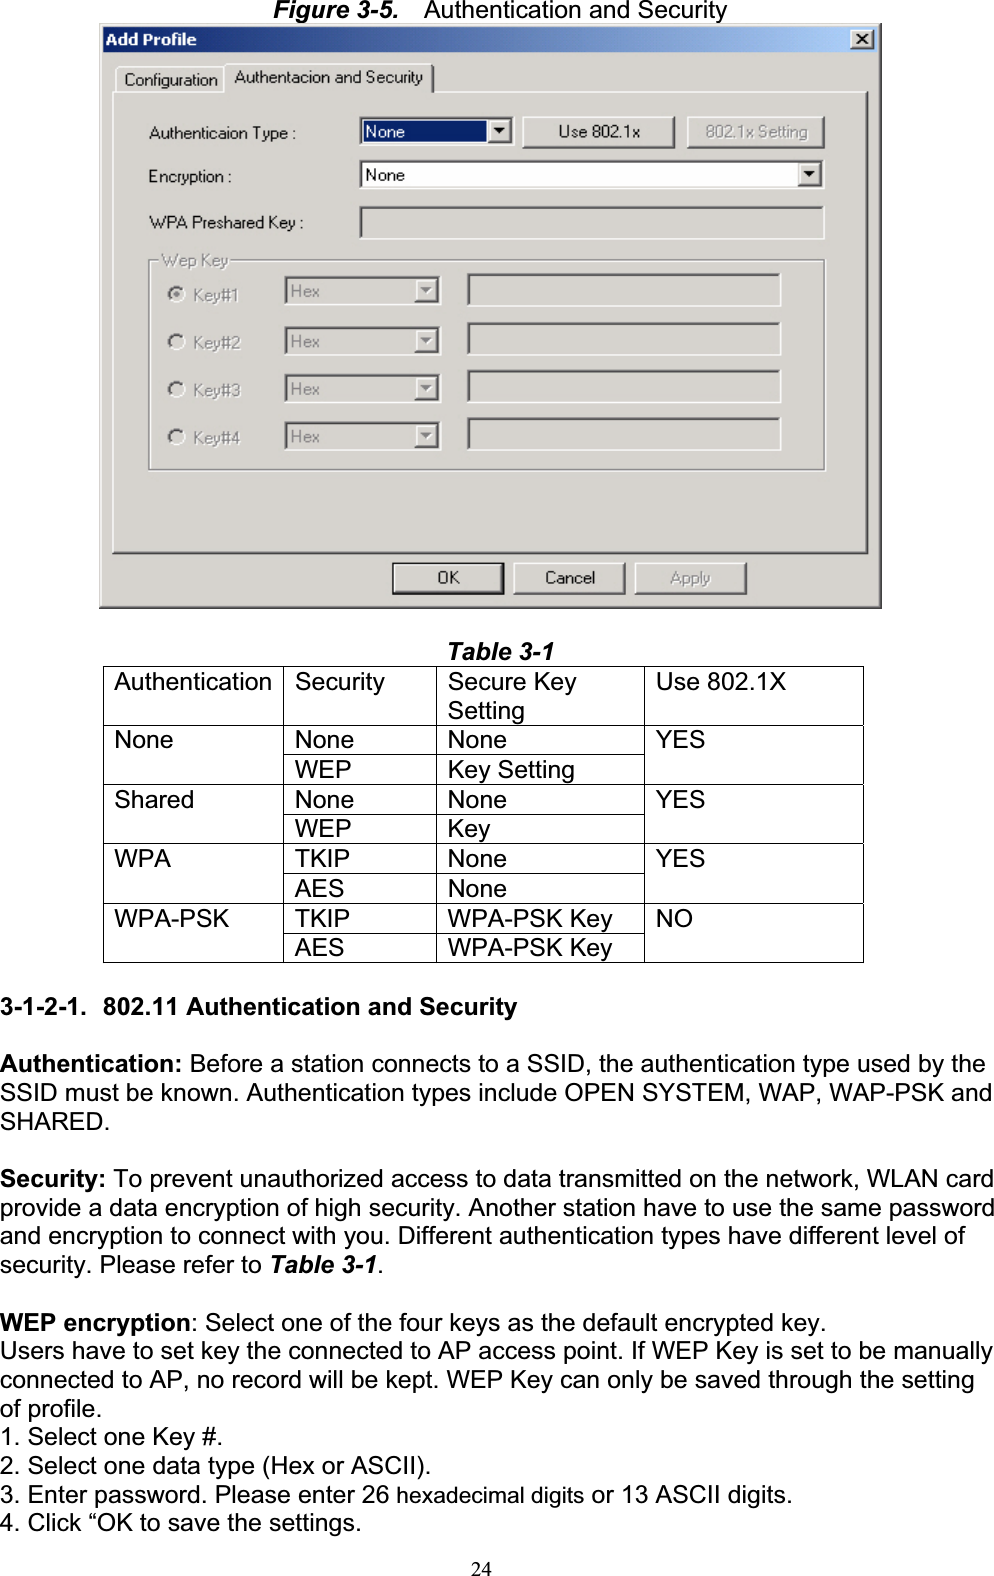 24Figure 3-5.    Authentication and Security Table 3-1Authentication Security  Secure Key SettingUse 802.1X None None NoneWEP Key Setting YESNone None SharedWEP Key  YESTKIP None WPAAES None YESTKIP WPA-PSK Key WPA-PSKAES WPA-PSK Key NO3-1-2-1.  802.11 Authentication and Security Authentication: Before a station connects to a SSID, the authentication type used by the SSID must be known. Authentication types include OPEN SYSTEM, WAP, WAP-PSK and SHARED. Security: To prevent unauthorized access to data transmitted on the network, WLAN card provide a data encryption of high security. Another station have to use the same password and encryption to connect with you. Different authentication types have different level of security. Please refer to Table 3-1.WEP encryption: Select one of the four keys as the default encrypted key. Users have to set key the connected to AP access point. If WEP Key is set to be manually connected to AP, no record will be kept. WEP Key can only be saved through the setting of profile. 1. Select one Key #. 2. Select one data type (Hex or ASCII). 3. Enter password. Please enter 26 hexadecimal digits or 13 ASCII digits. 4. Click “OK to save the settings. 